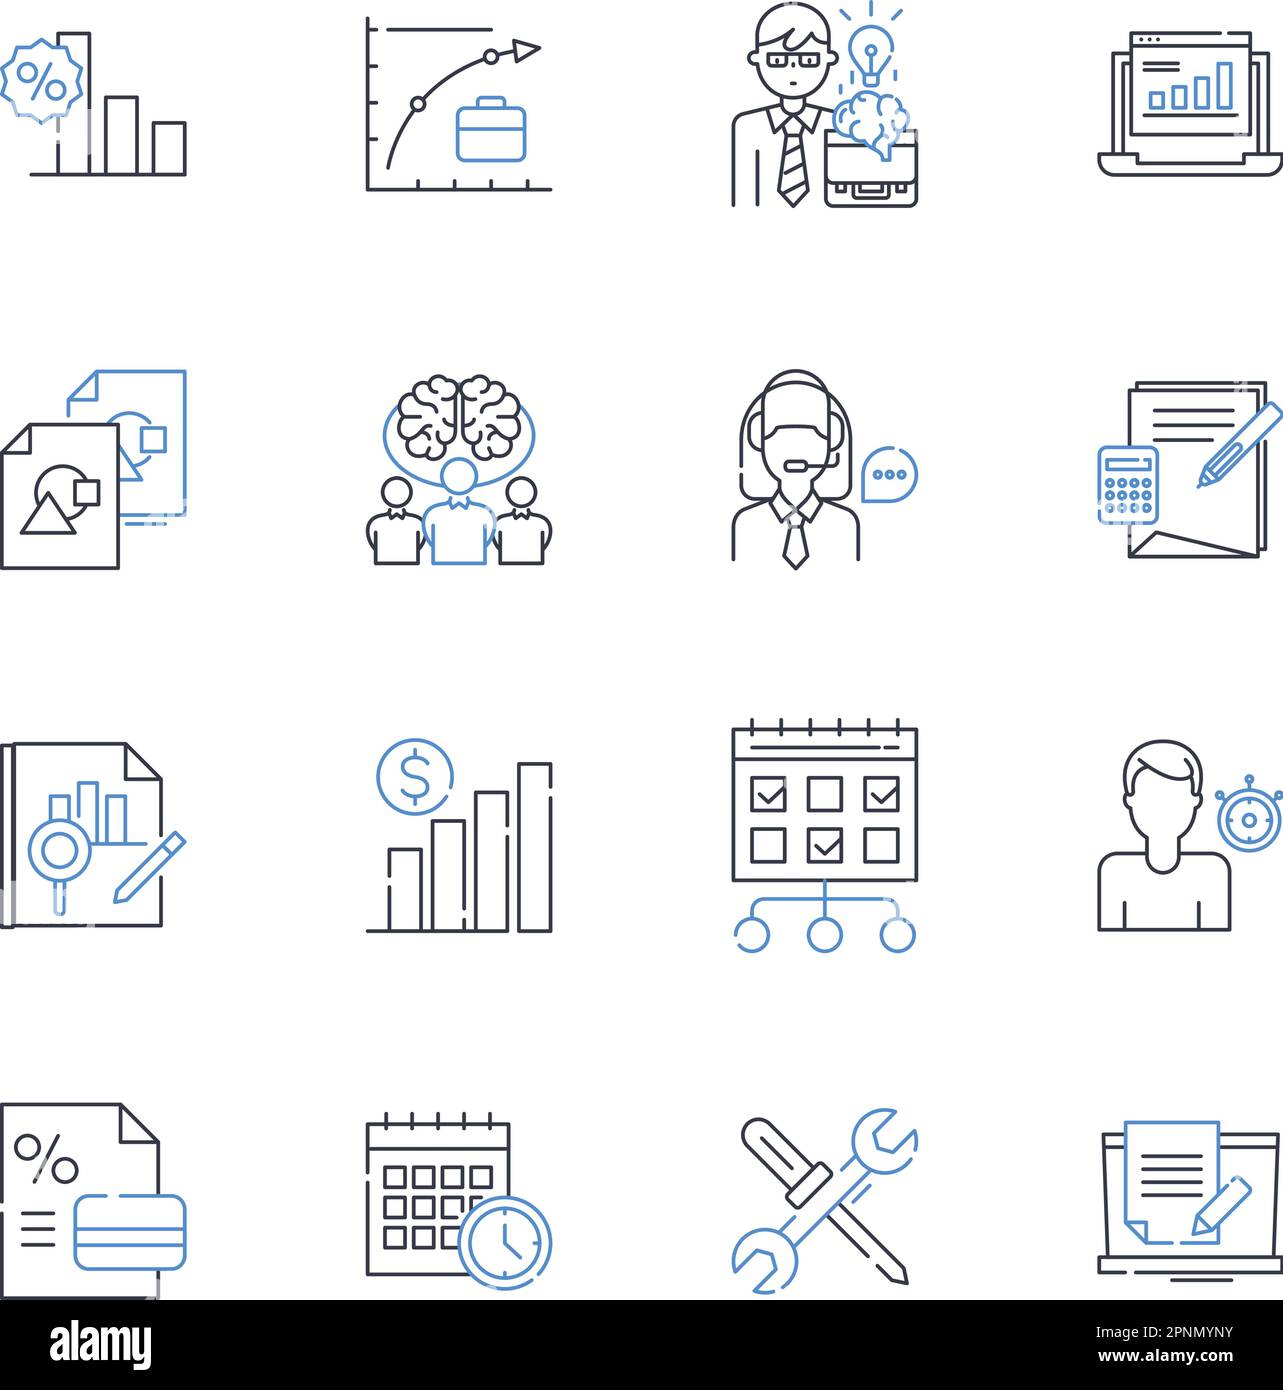 Performance Analytics line icons collection. Metrics, Analysis, Dashboards, Visualization, Insights, KPIs, Reporting vector and linear illustration Stock Vector